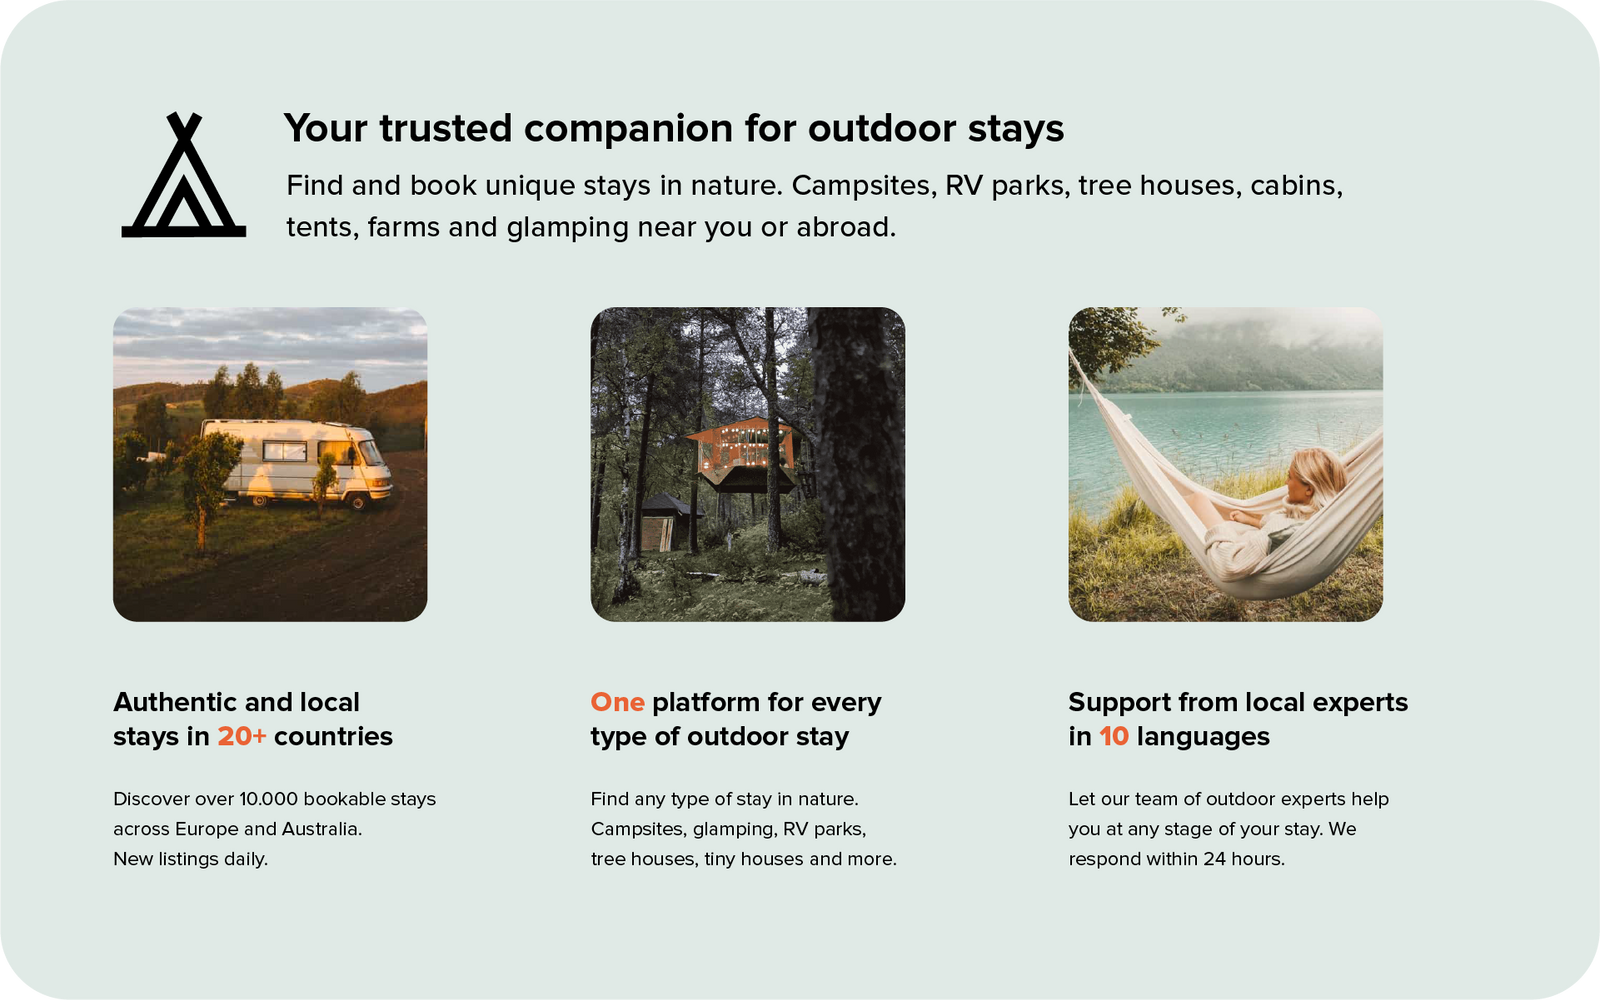 We are your trusted companion on a camping trip to Spain and elsewhere